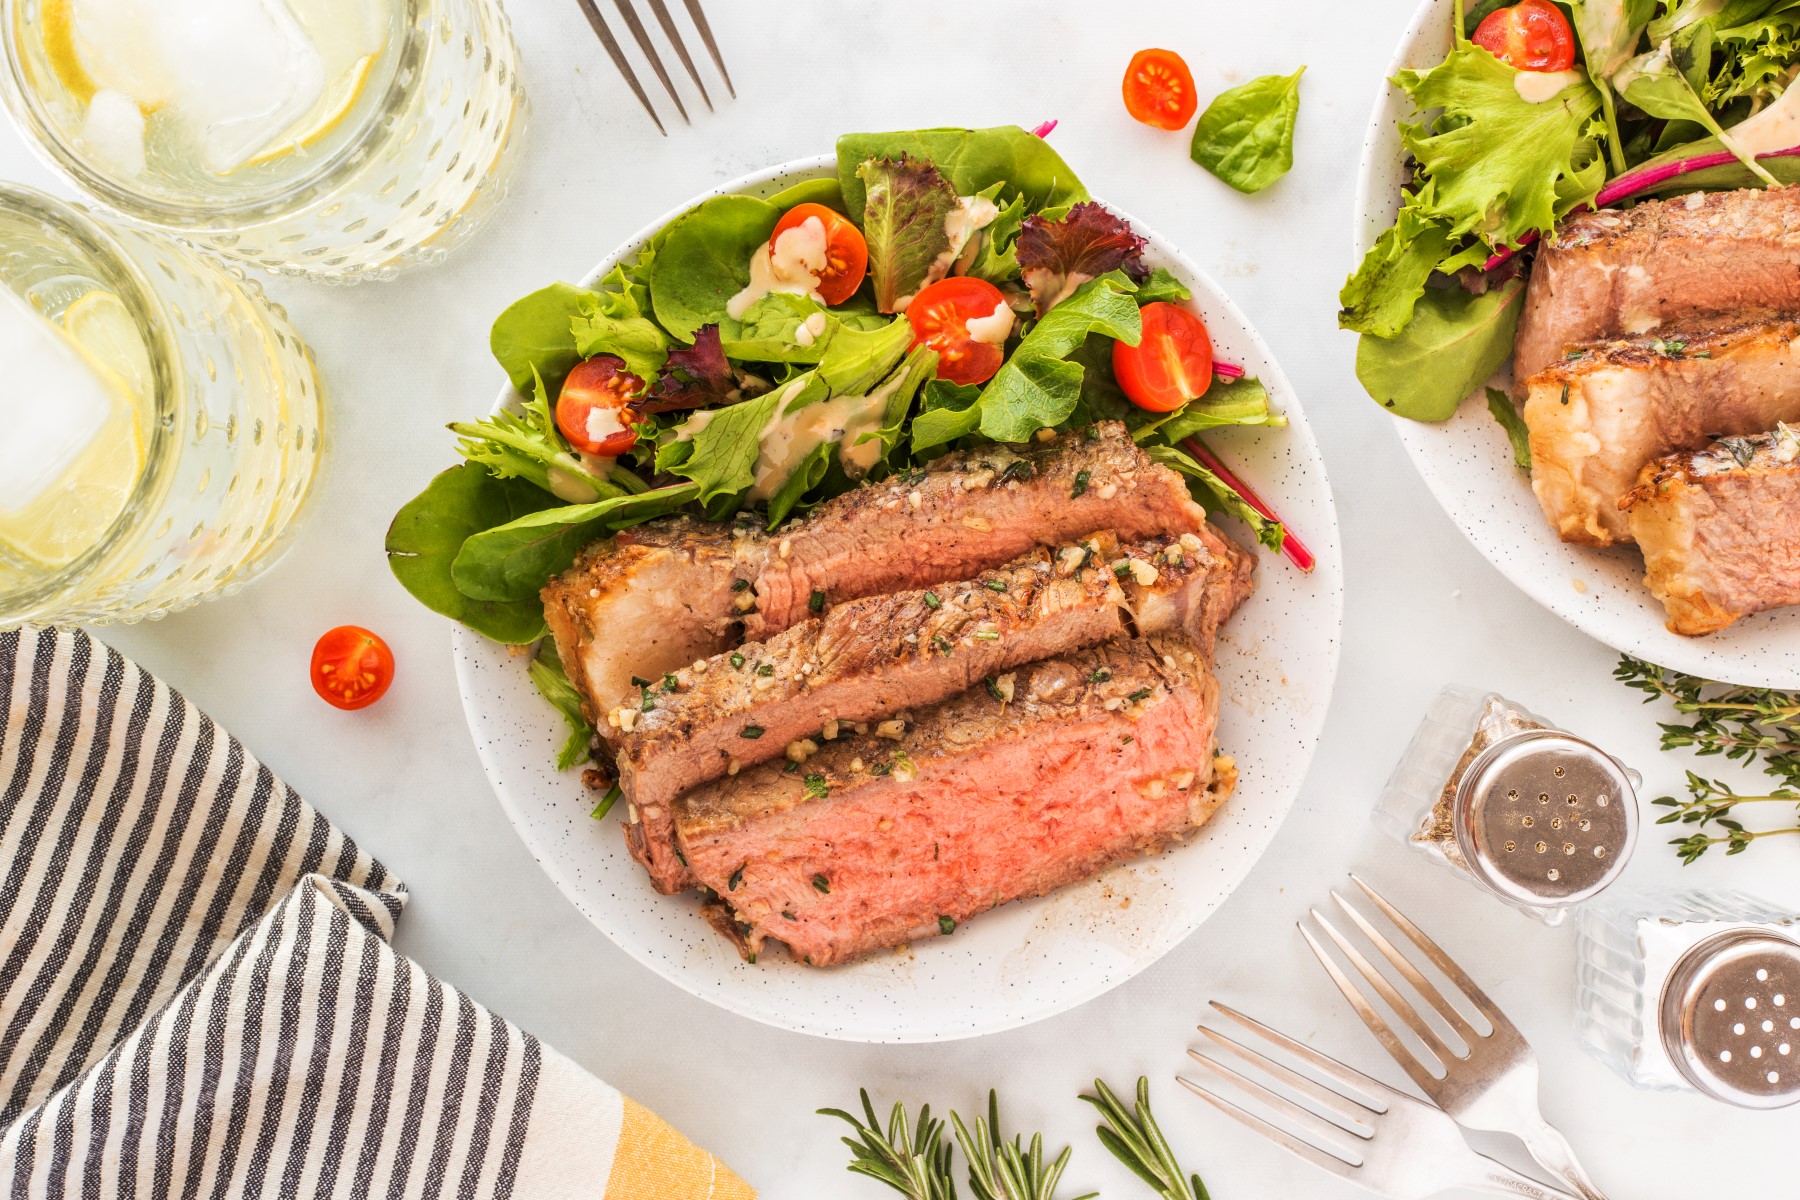 Slices of grilled tomahawk steak served on a white plate with a green salad.